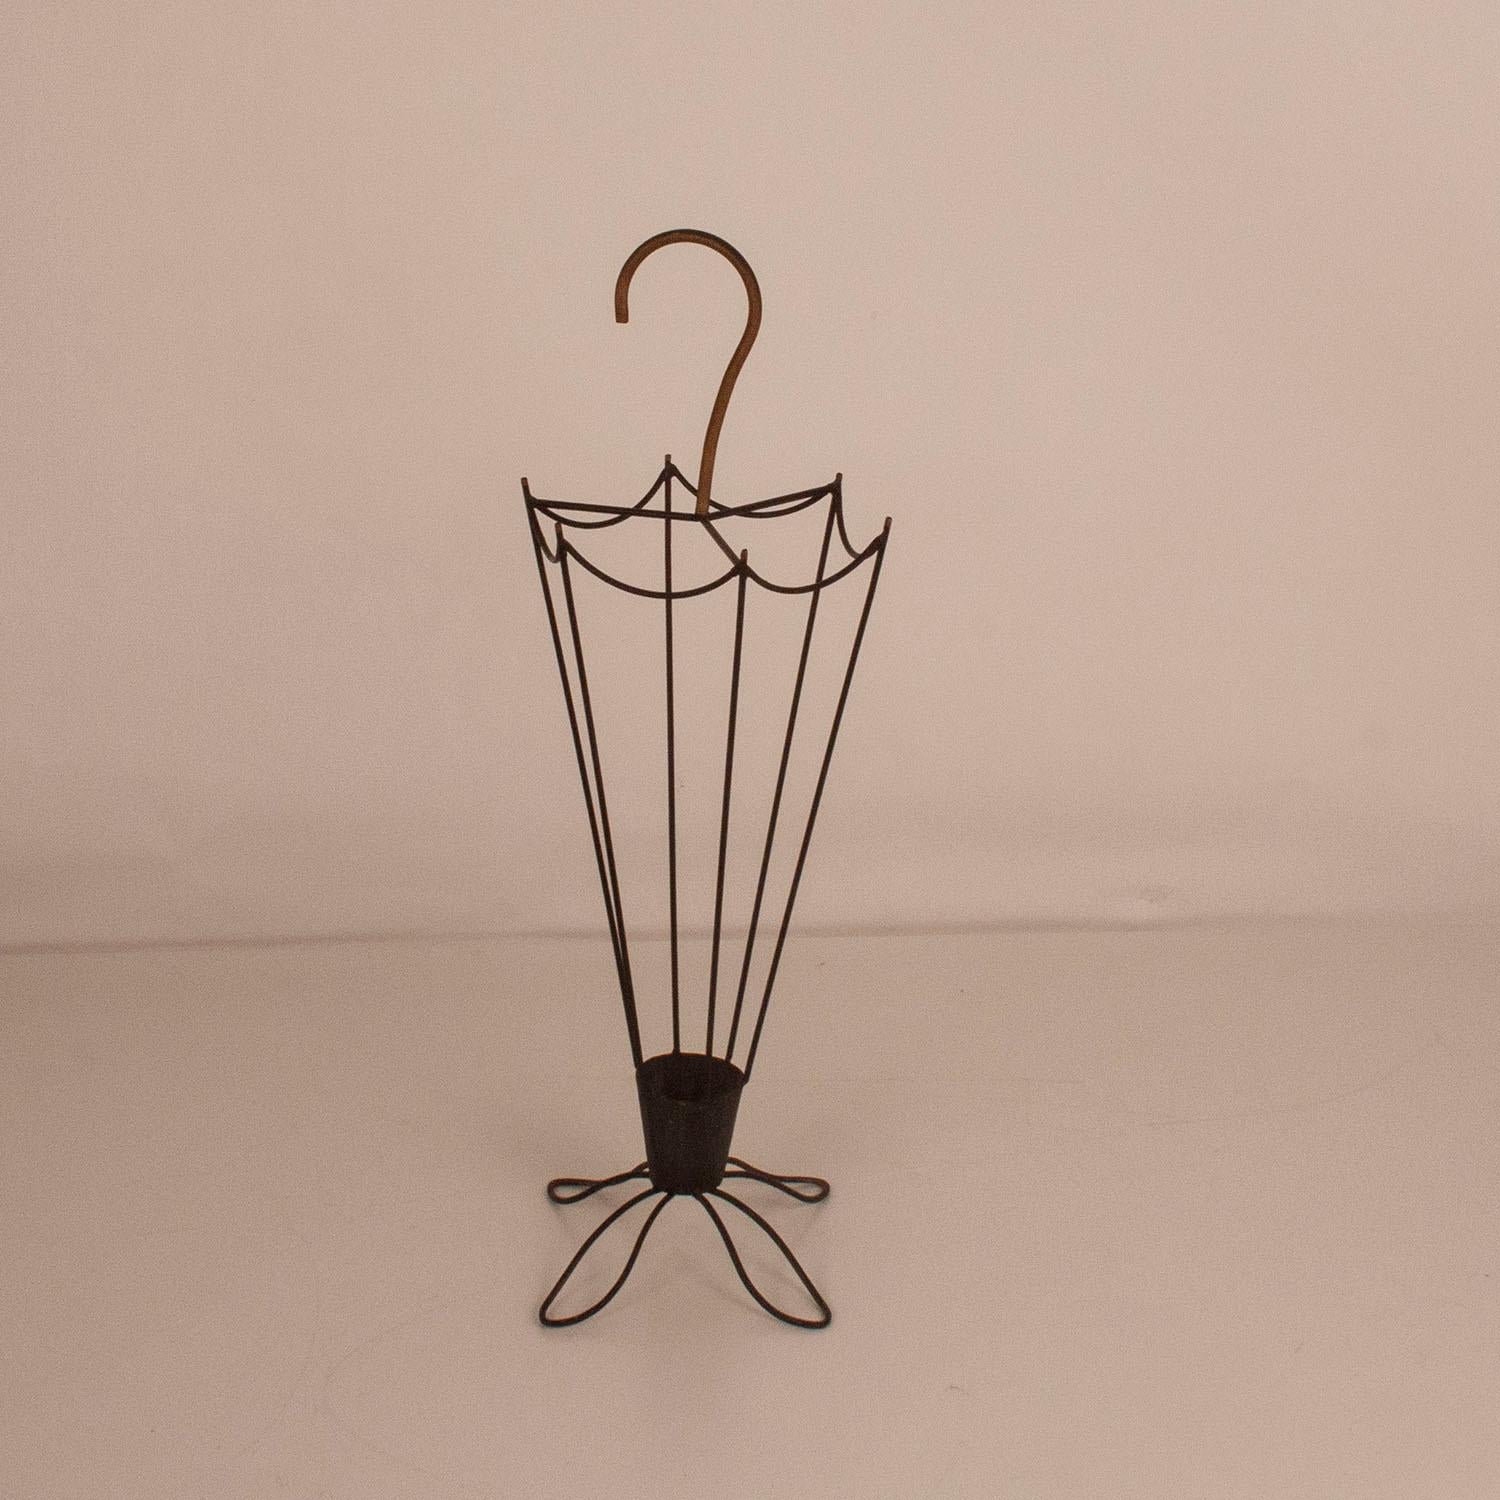 Mid-20th Century Iron Umbrella Stand, Spain, 1960s For Sale